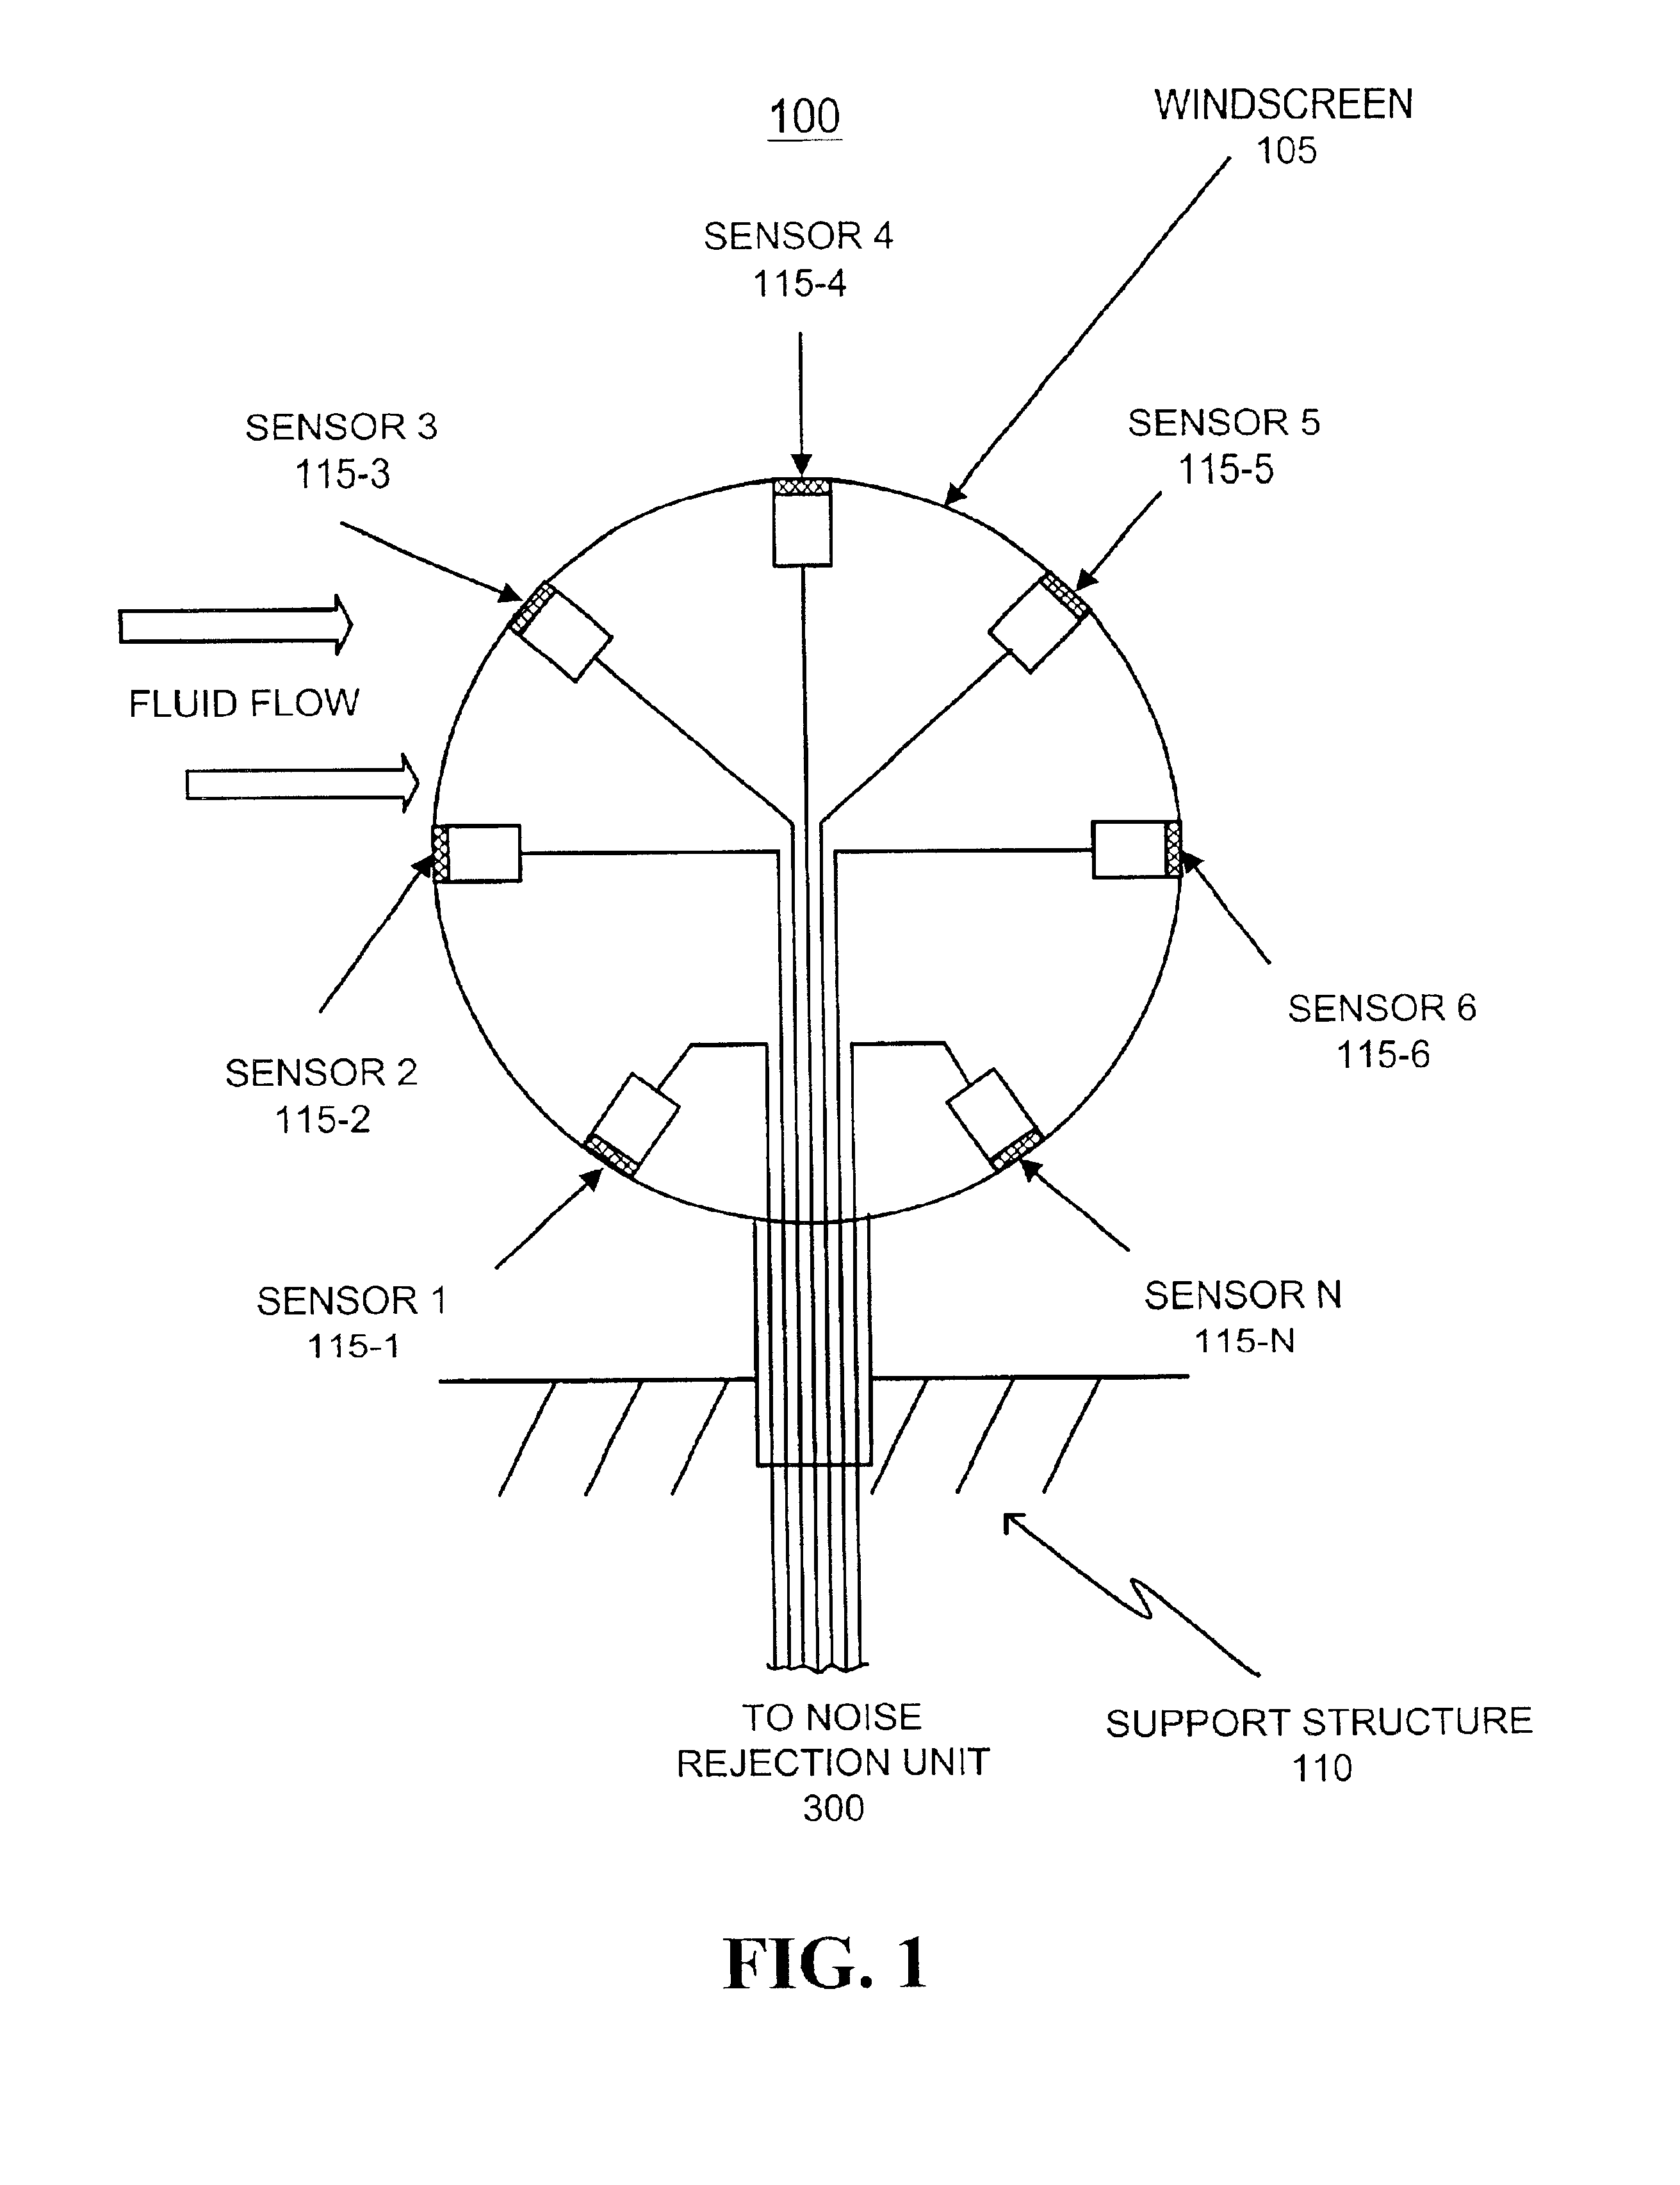 Systems and methods for adaptive wind noise rejection